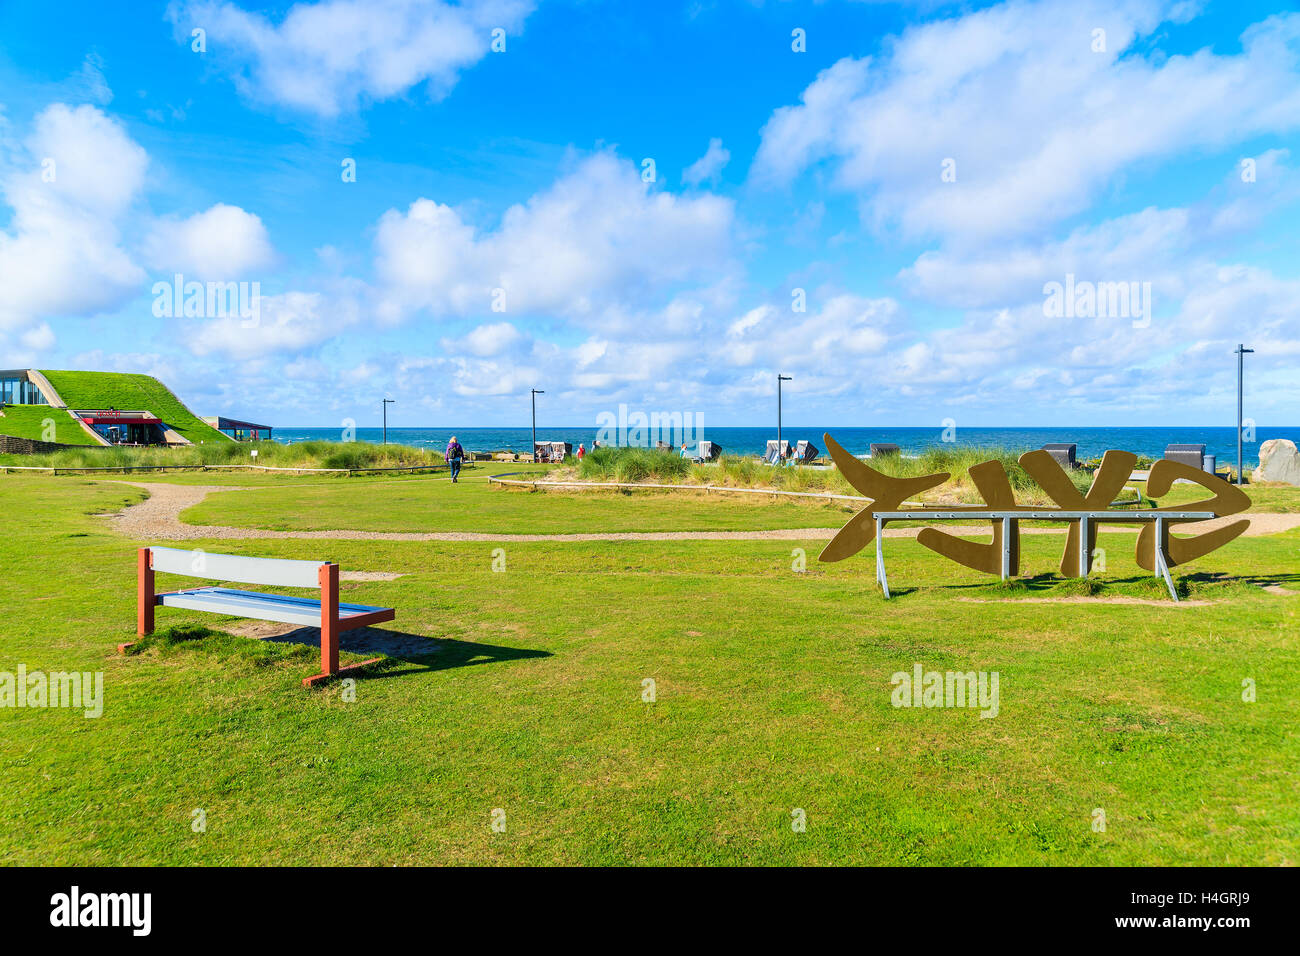 WENNINGSTED TOWN, SYLT ISLAND - SEP 11, 2016: green park with 'Sylt' sign on coastal promenade on Sylt island, Germany. Stock Photo